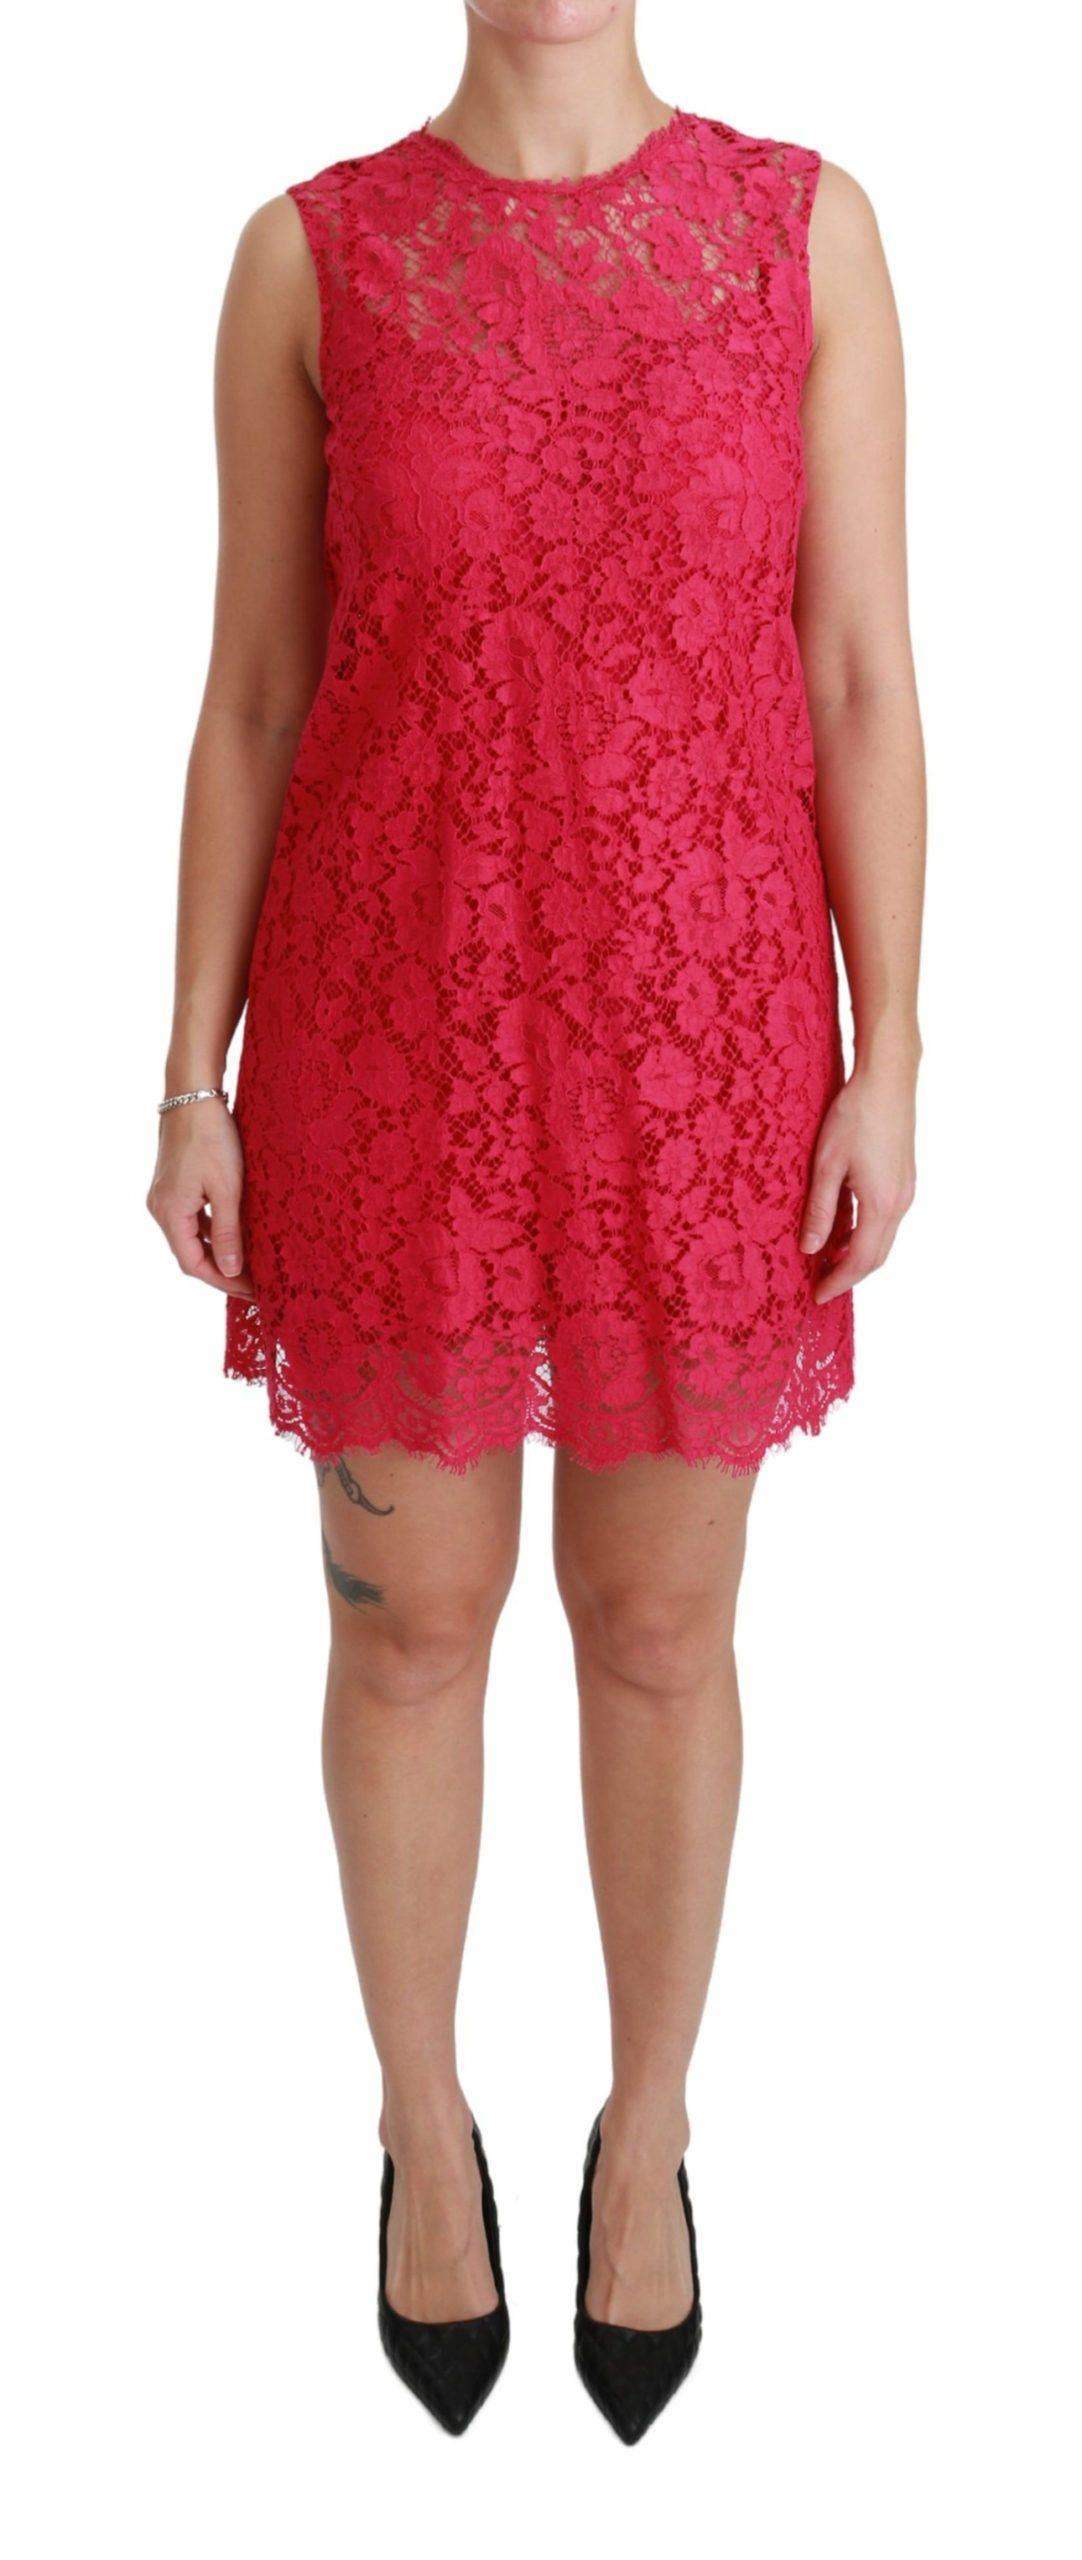 Dolce & Gabbana  Pink Floral Lace Shift Gown Mini Dress #women, Brand_Dolce & Gabbana, Catch, Clothing_Dress, Dolce & Gabbana, Dresses - Women - Clothing, feed-agegroup-adult, feed-color-pink, feed-gender-female, feed-size-IT36 | XS, feed-size-IT38|XS, feed-size-IT40|S, feed-size-IT42|M, feed-size-IT44|L, feed-size-IT46|XL, Gender_Women, IT36 | XS, IT38|XS, IT40|S, IT42|M, IT44|L, IT46|XL, Kogan, Pink, Women - New Arrivals at SEYMAYKA